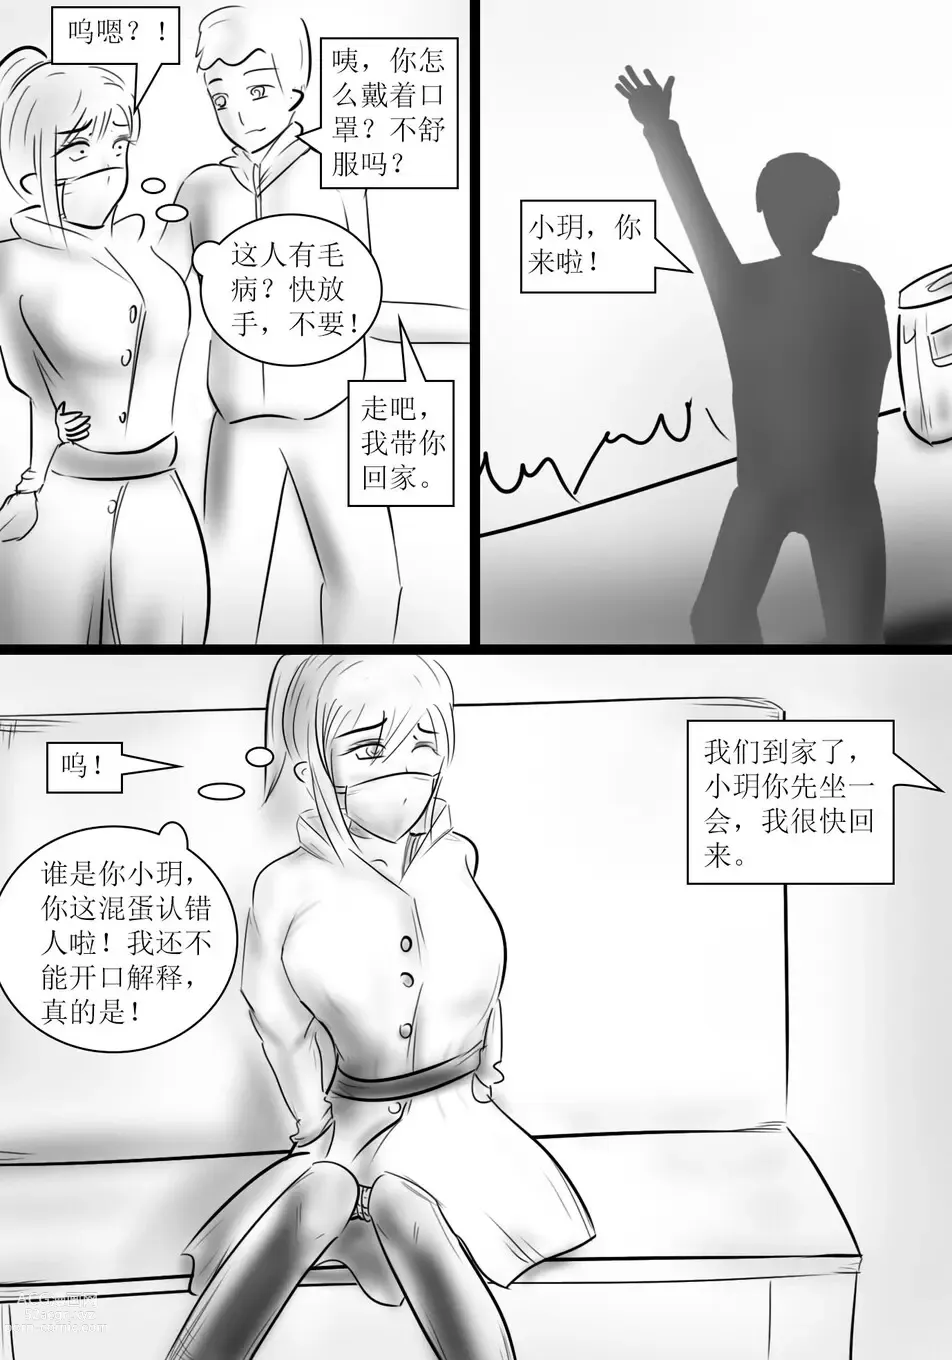 Page 6 of doujinshi The crisis in public self bondage